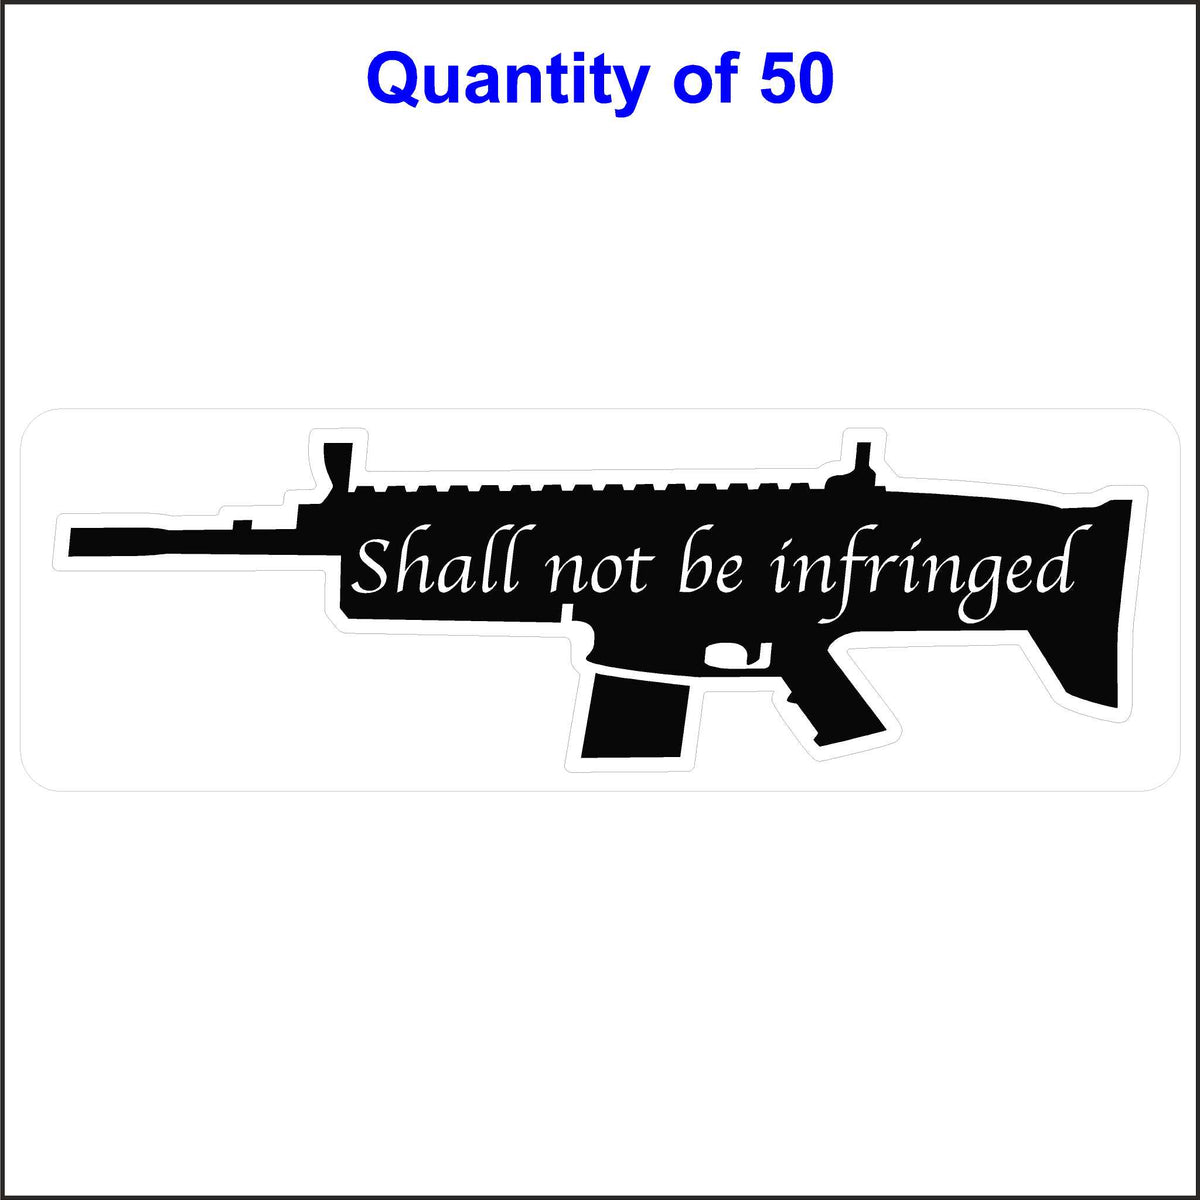 2nd Amendment Sticker With a Gun Silhouette With the Words Shall Not Be Infringed Printed on the Gun. 50 Quantity.